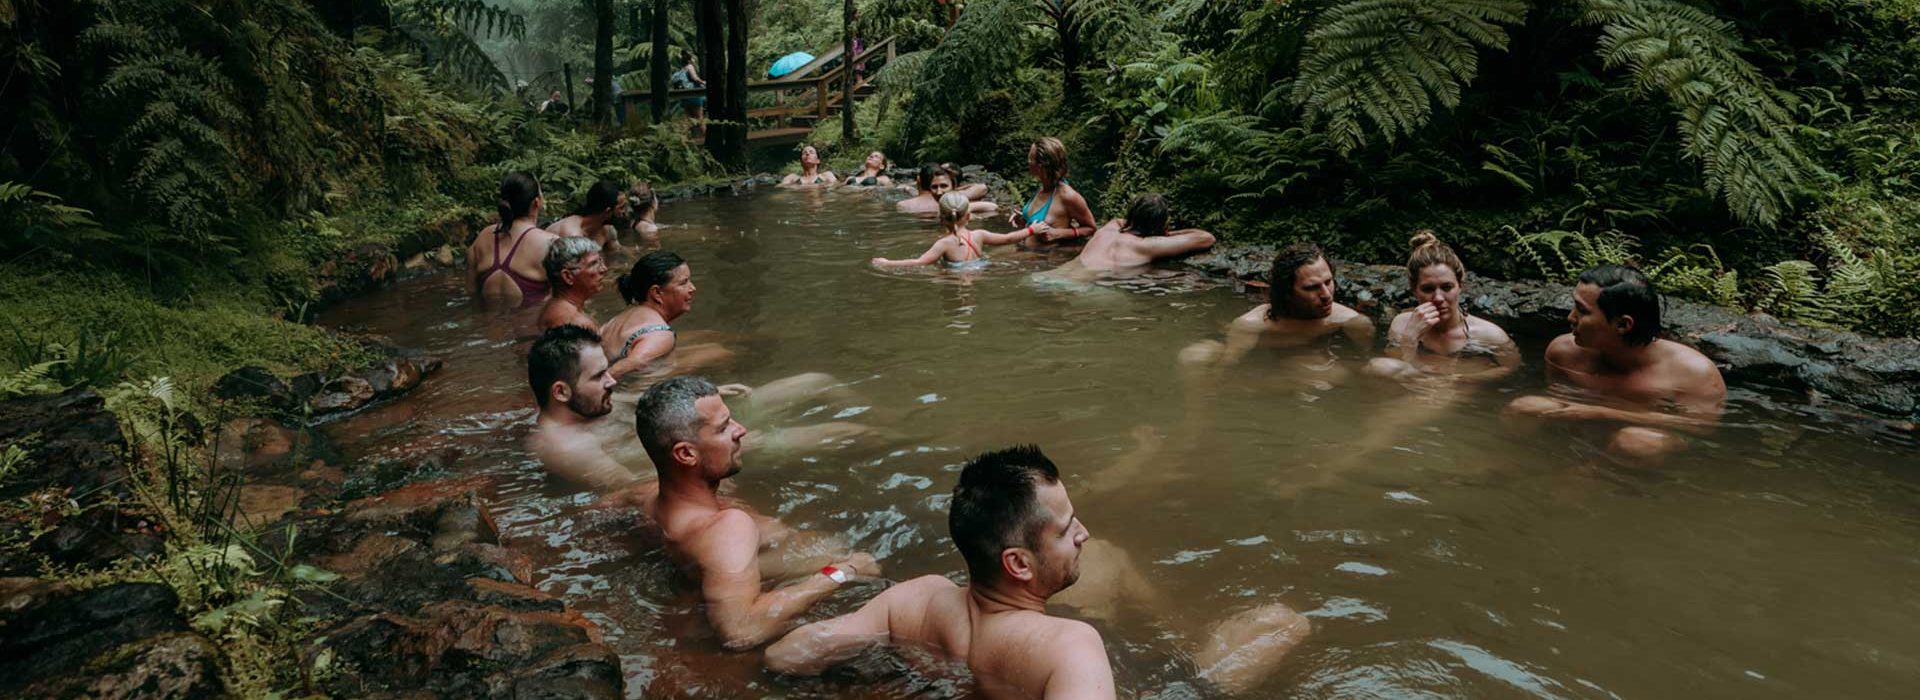 The thermal baths in a Jurassic Park scenery are the perfect place to chill.